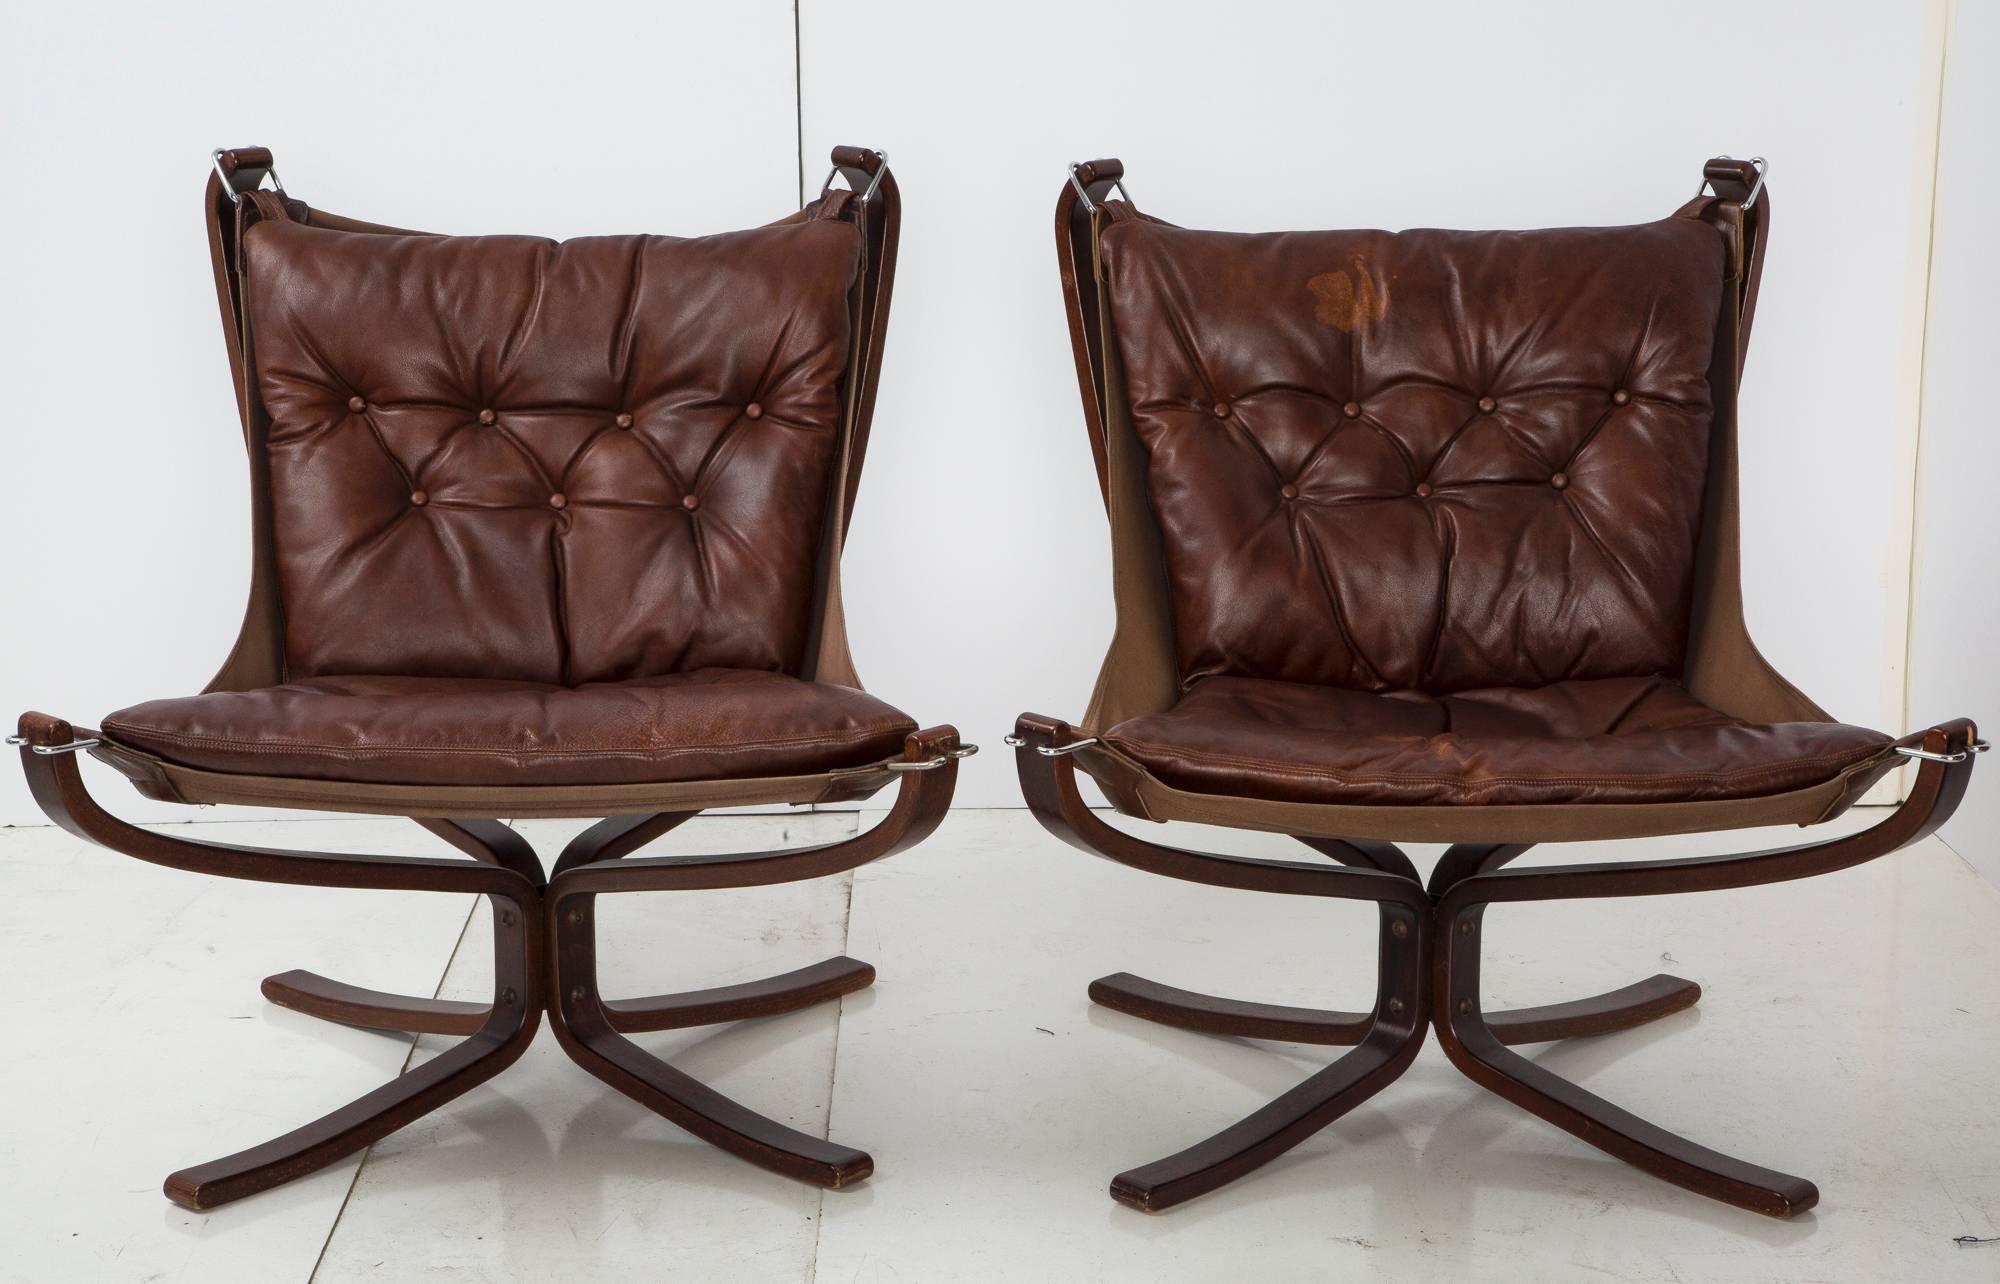 Classic pair of Sigurd Ressell leather falcon chairs. Sits very comfortably. Ottoman dimensions: 24